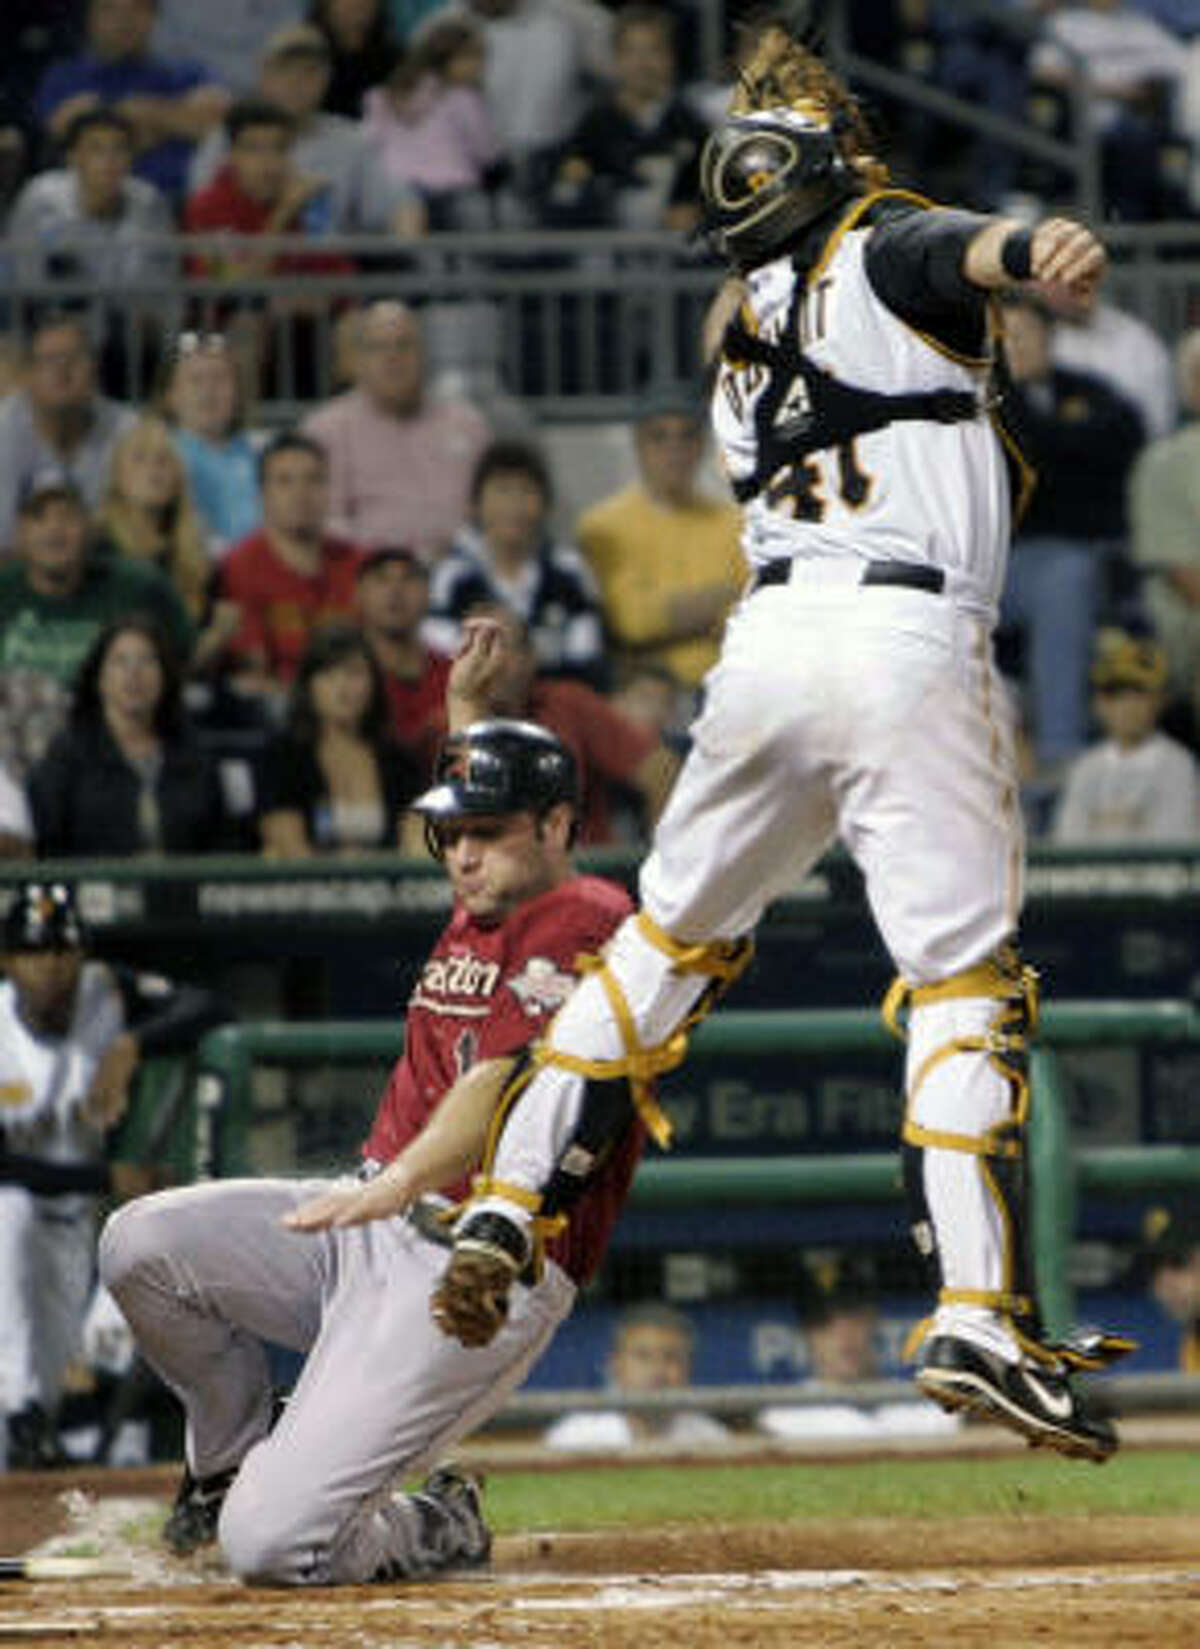 Pittsburgh Pirates catcher Ryan Doumit, top, leaps for a bad throw from left fielder Nyjer Morgan as Astros first baseman Lance Berkman, bottom, scores in the fourth inning on Friday at PNC Park in Pittsburgh.